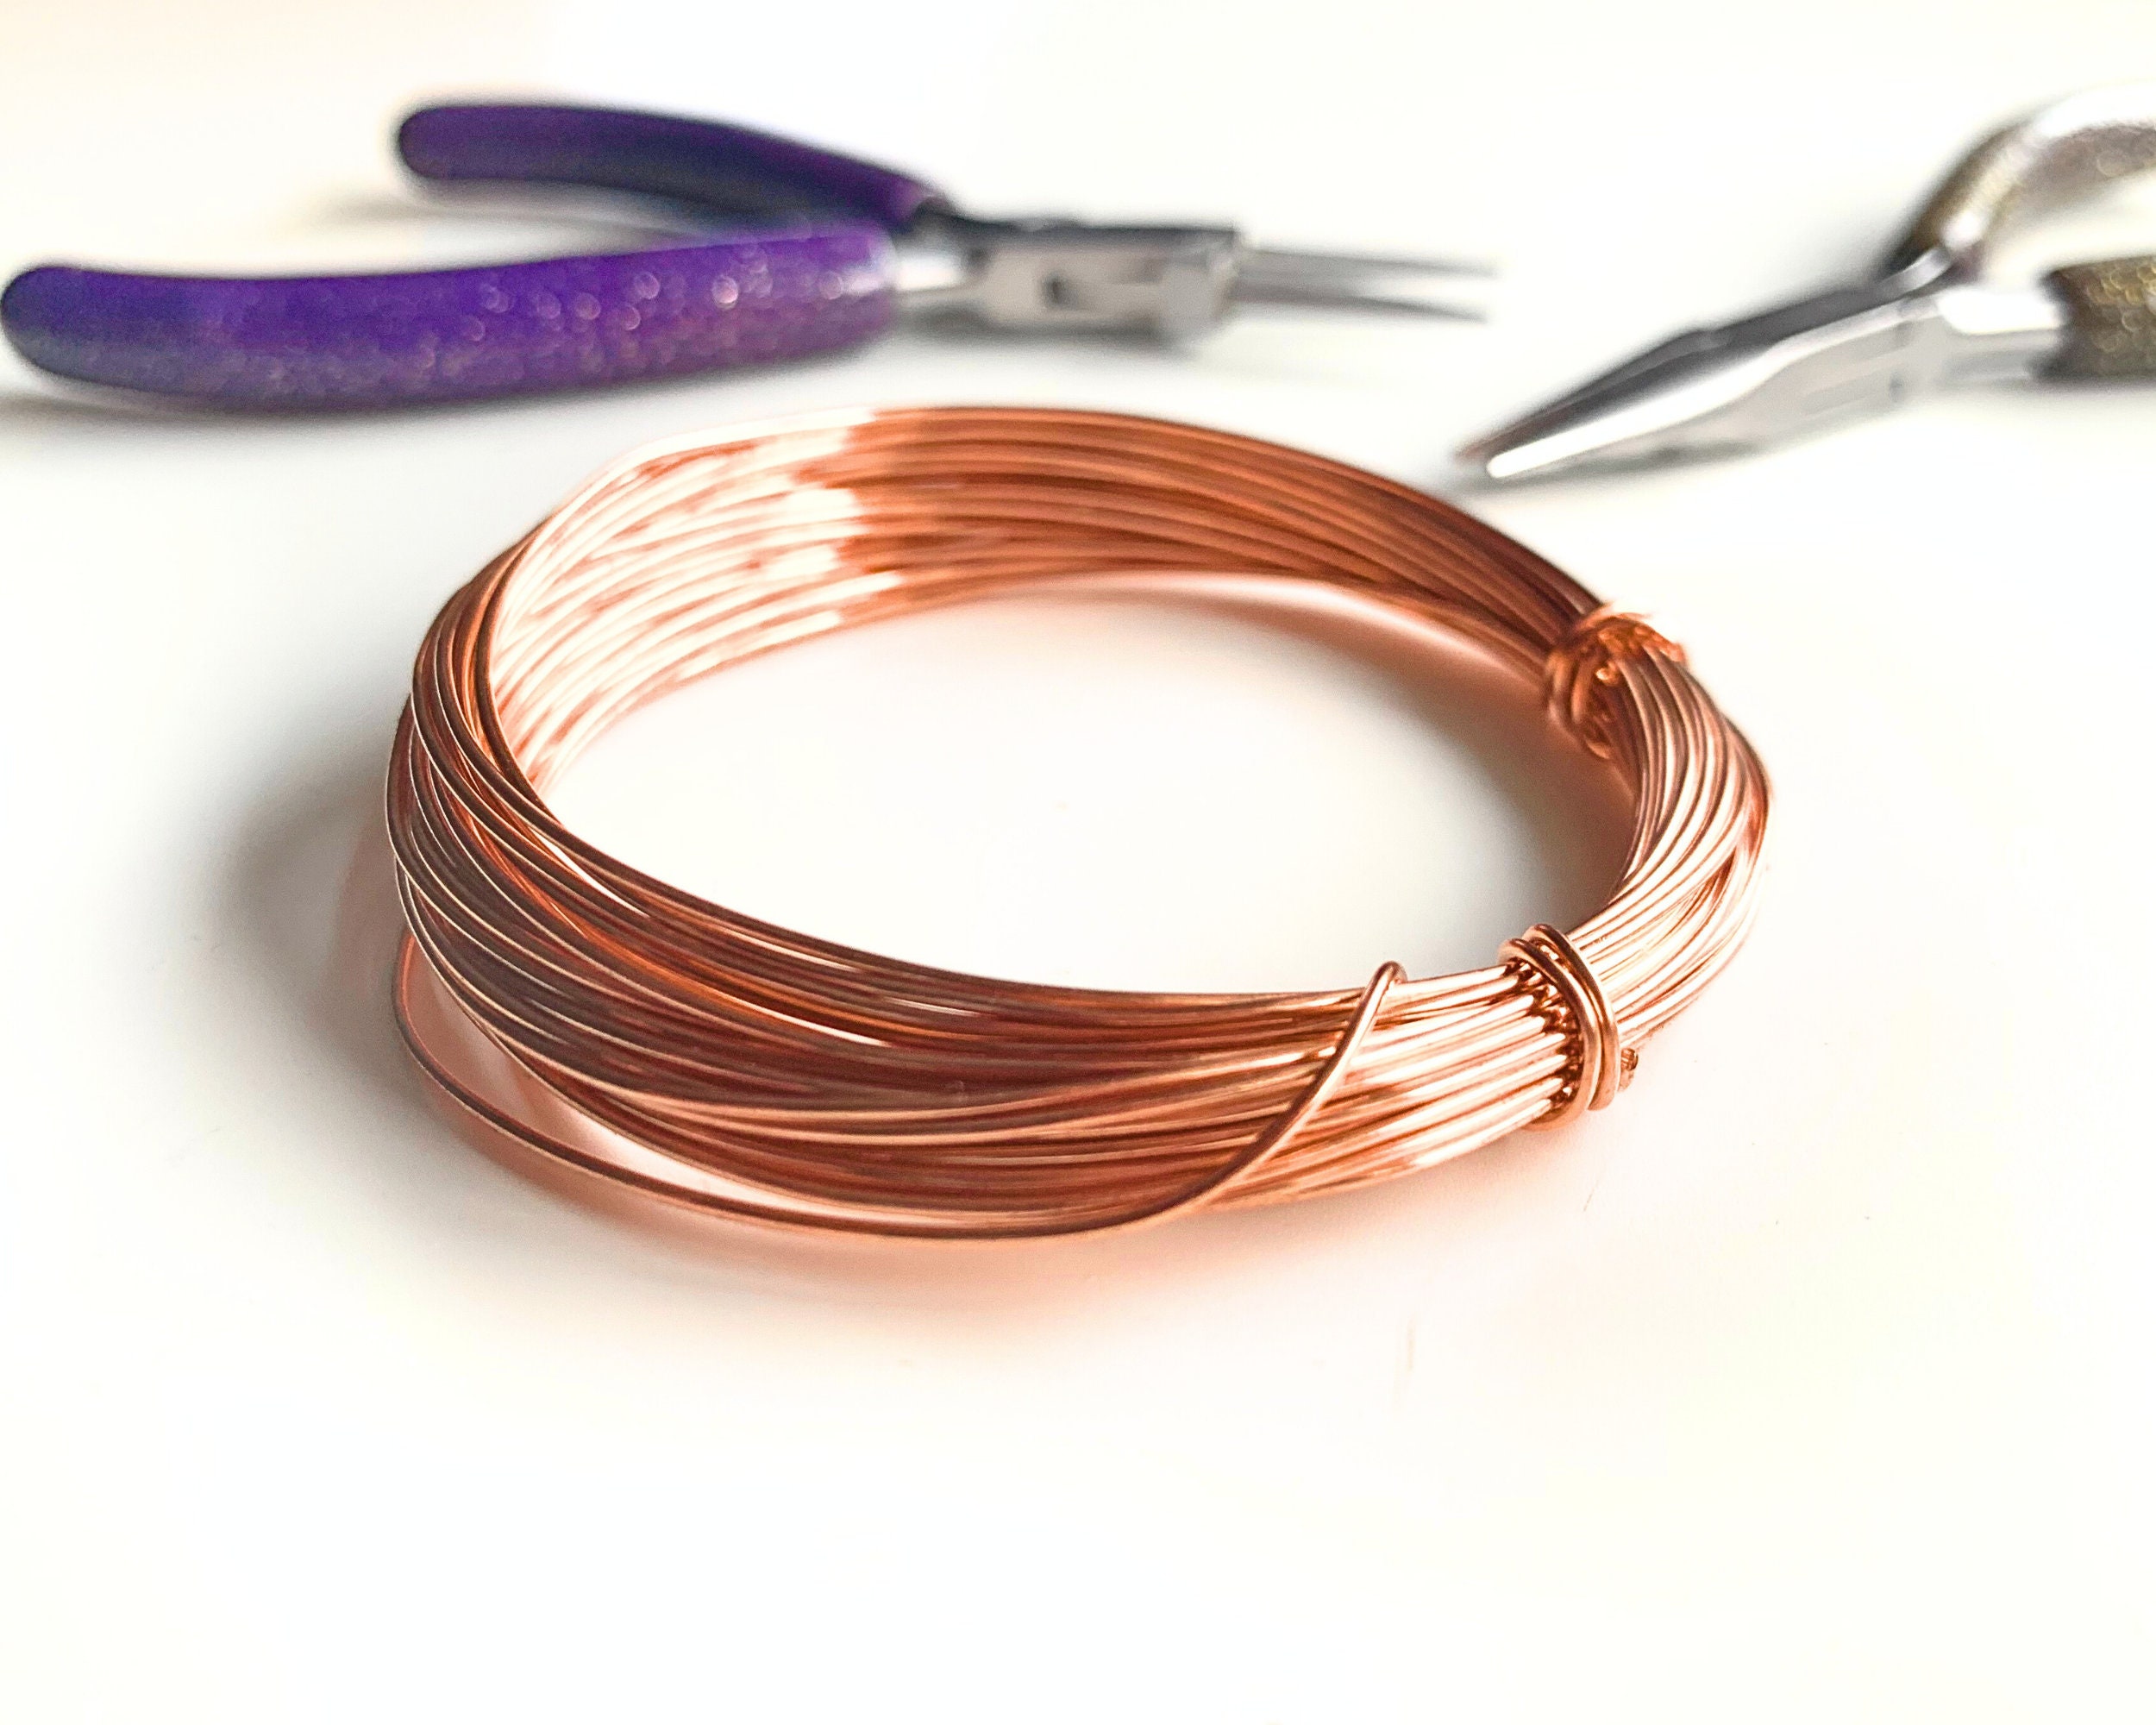 Copper Wire 0.56mm 23 AWG Dead Soft, Bare, Round Copper Wire for Wire Wrap  Jewellery Making Uncoated Wire for Oxidising, 12 METRES 